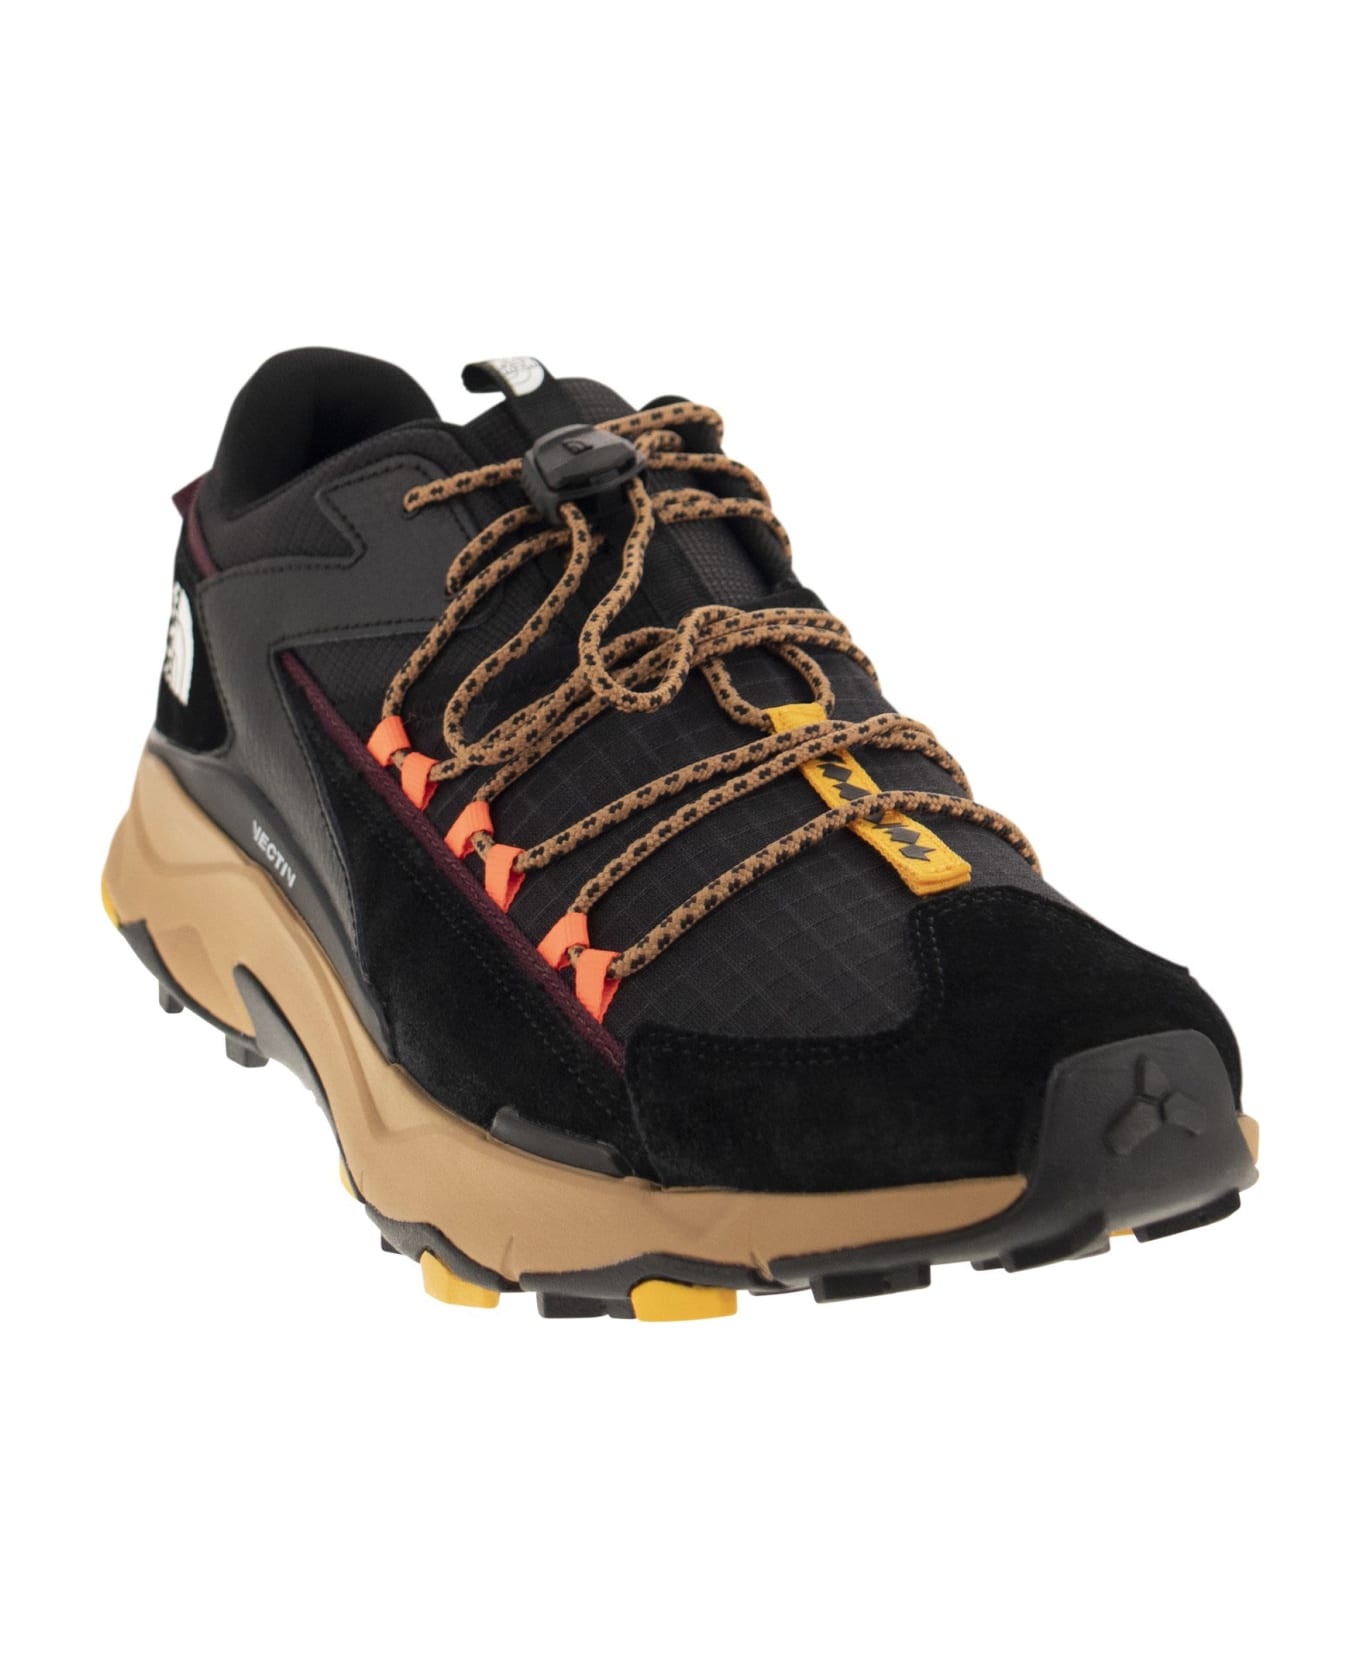 The North Face Vectiv Taraval - Technical Shoes - Black